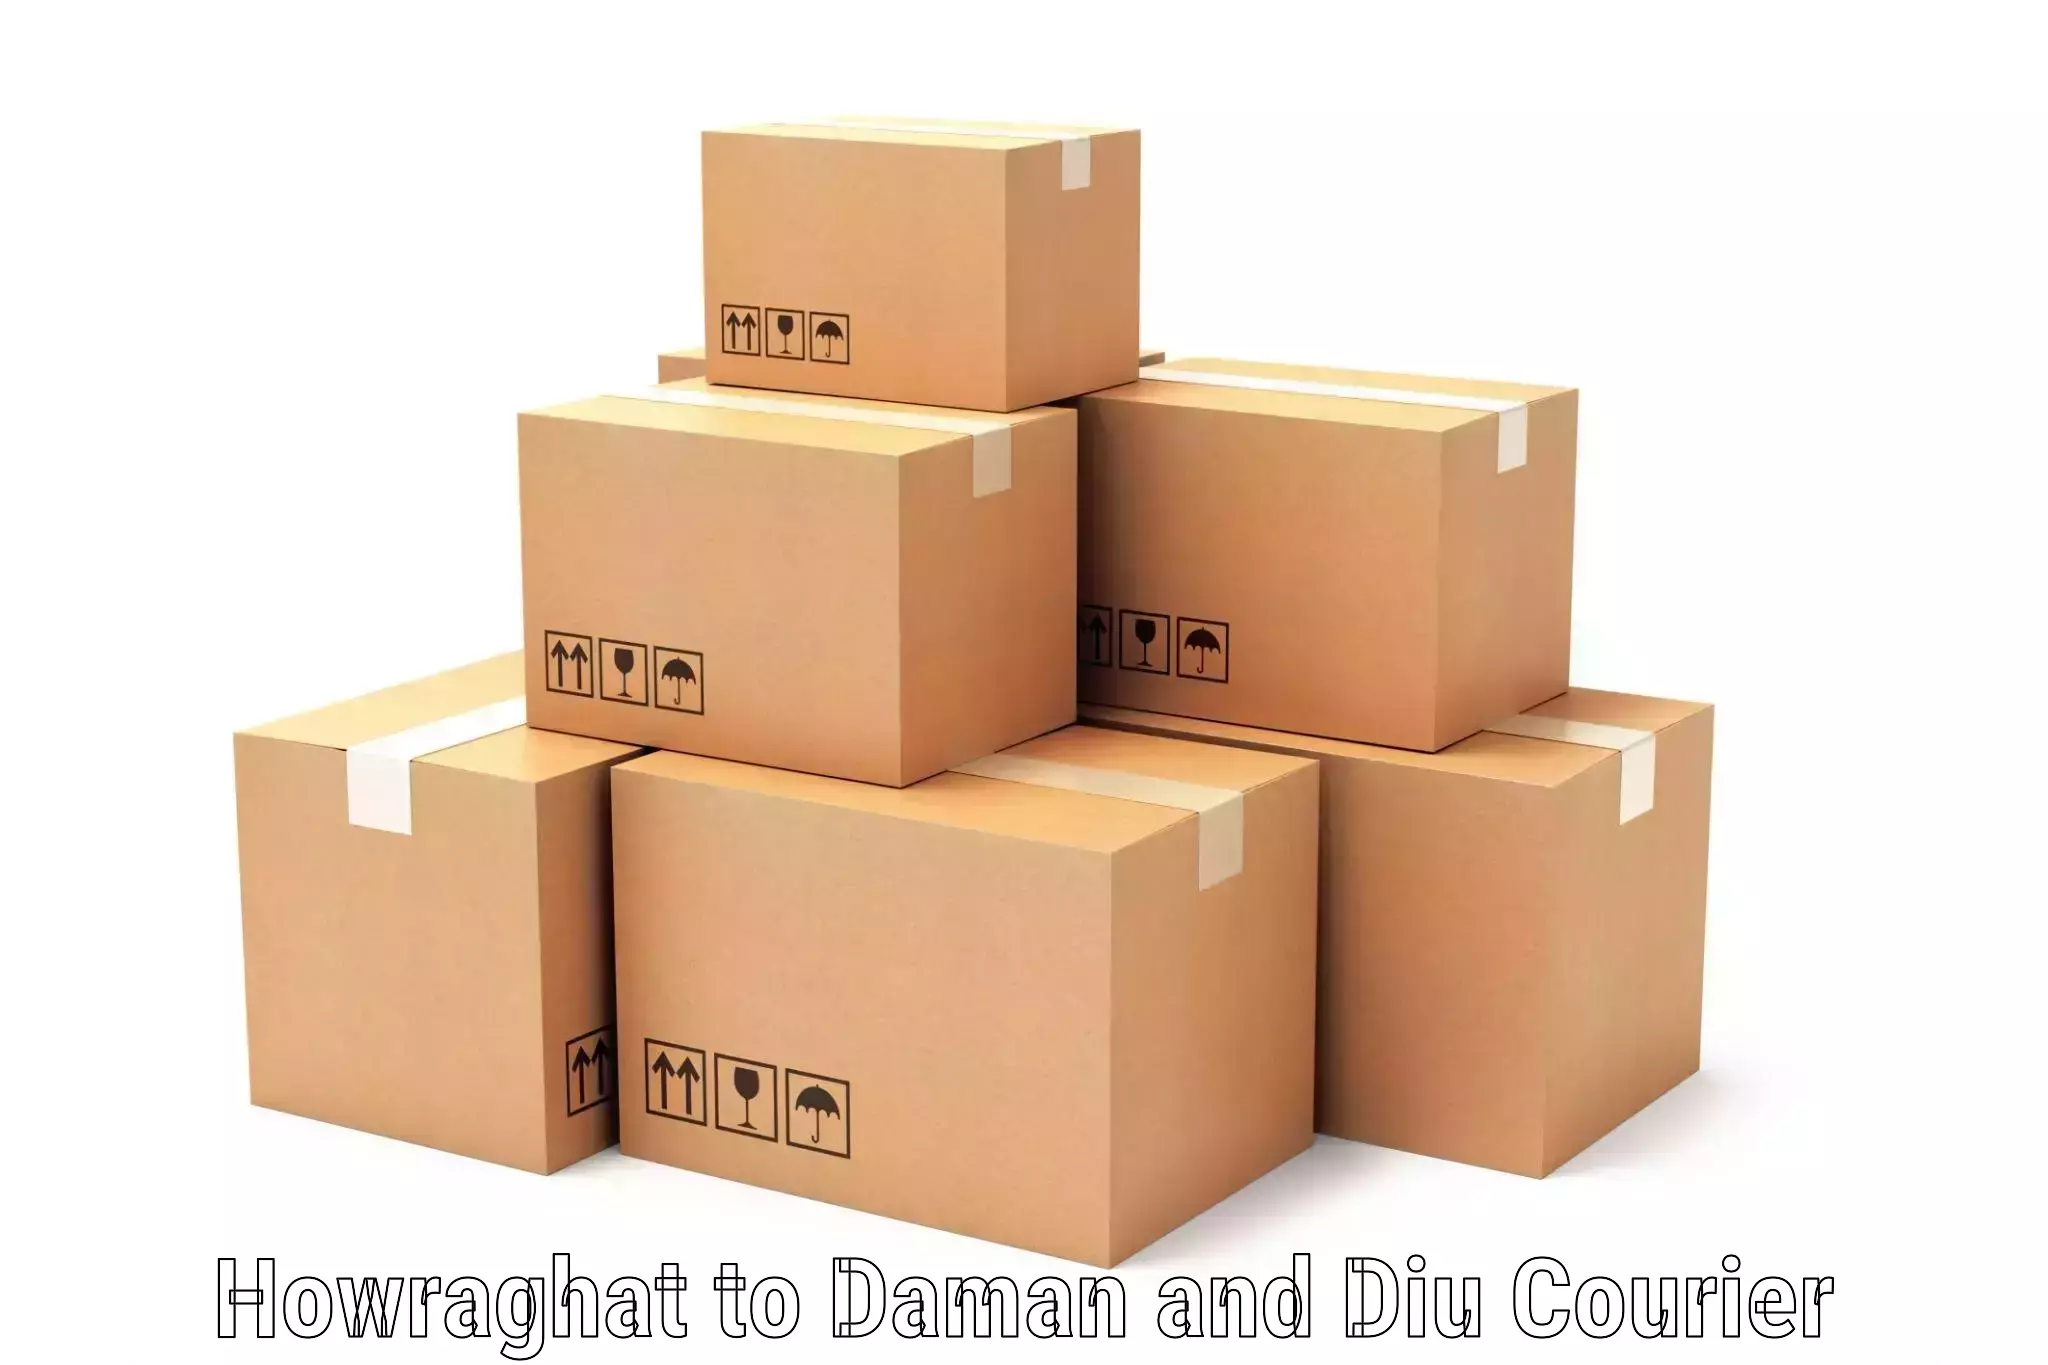 Package consolidation Howraghat to Daman and Diu